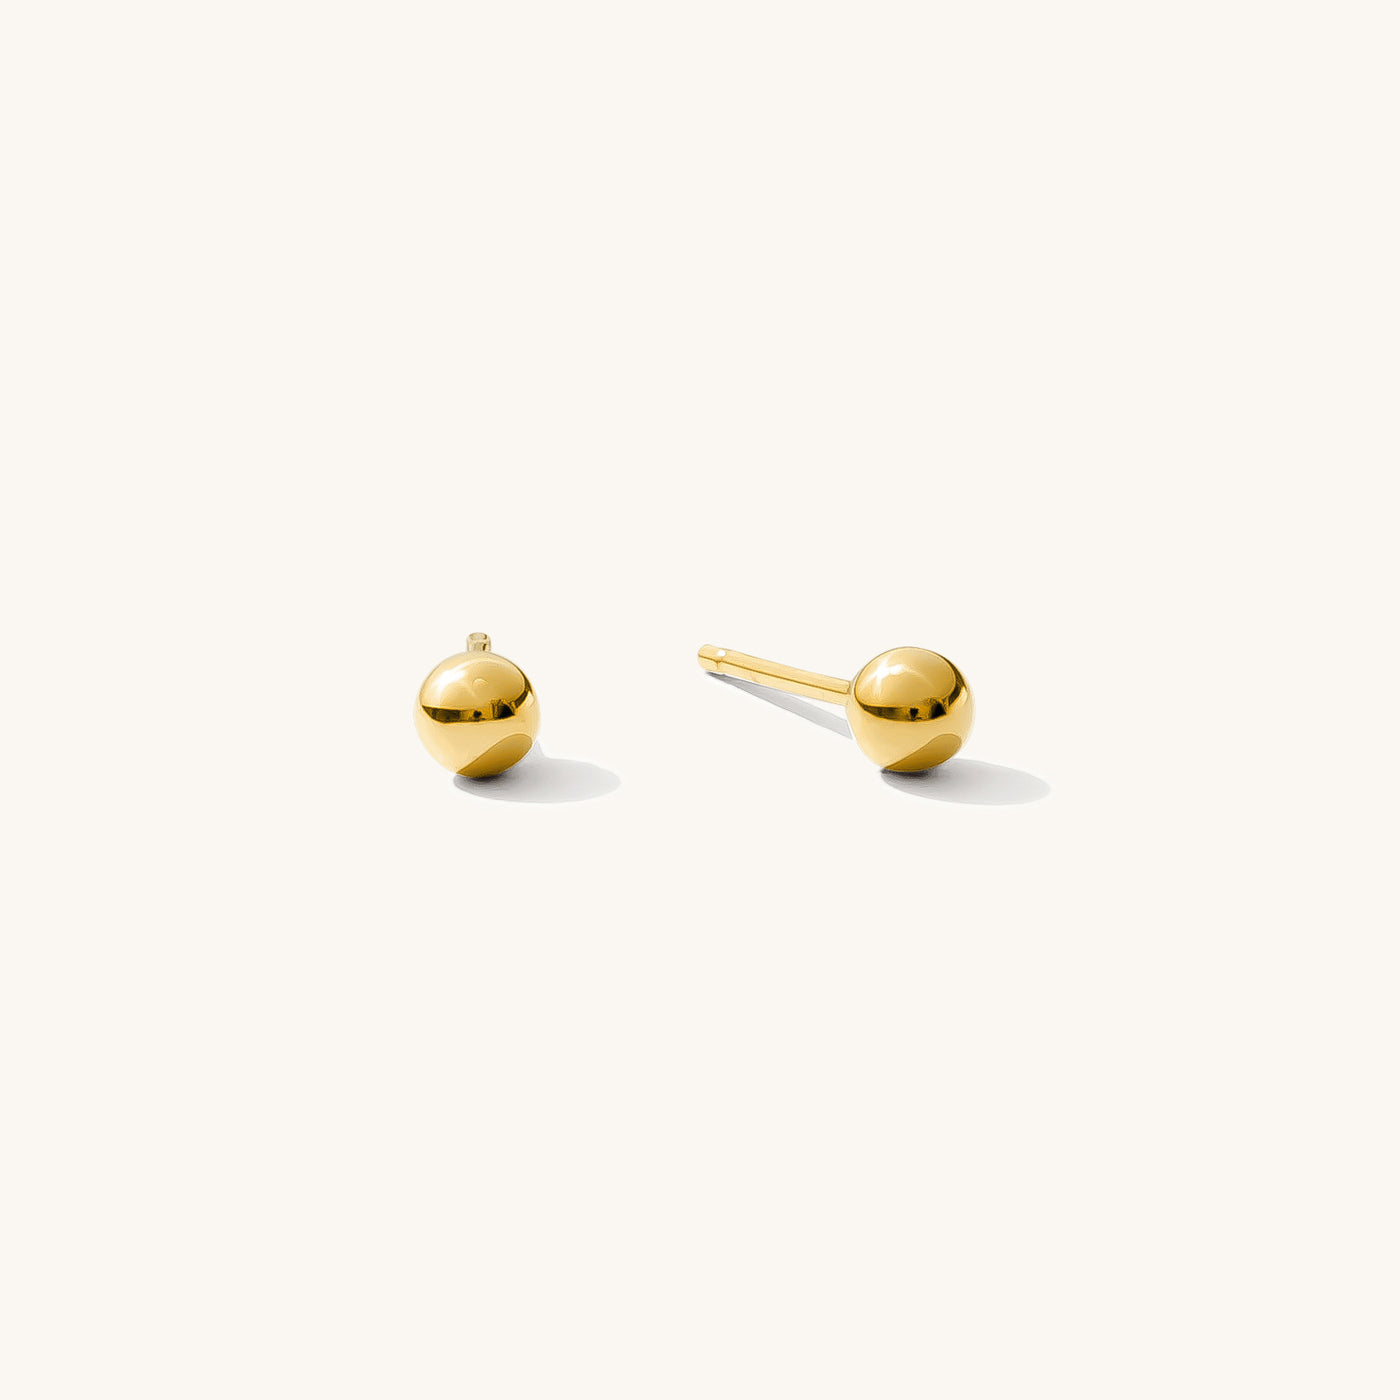 Tiny Ball Stud Earrings - 14k Solid Gold | Simple & Dainty Jewelry